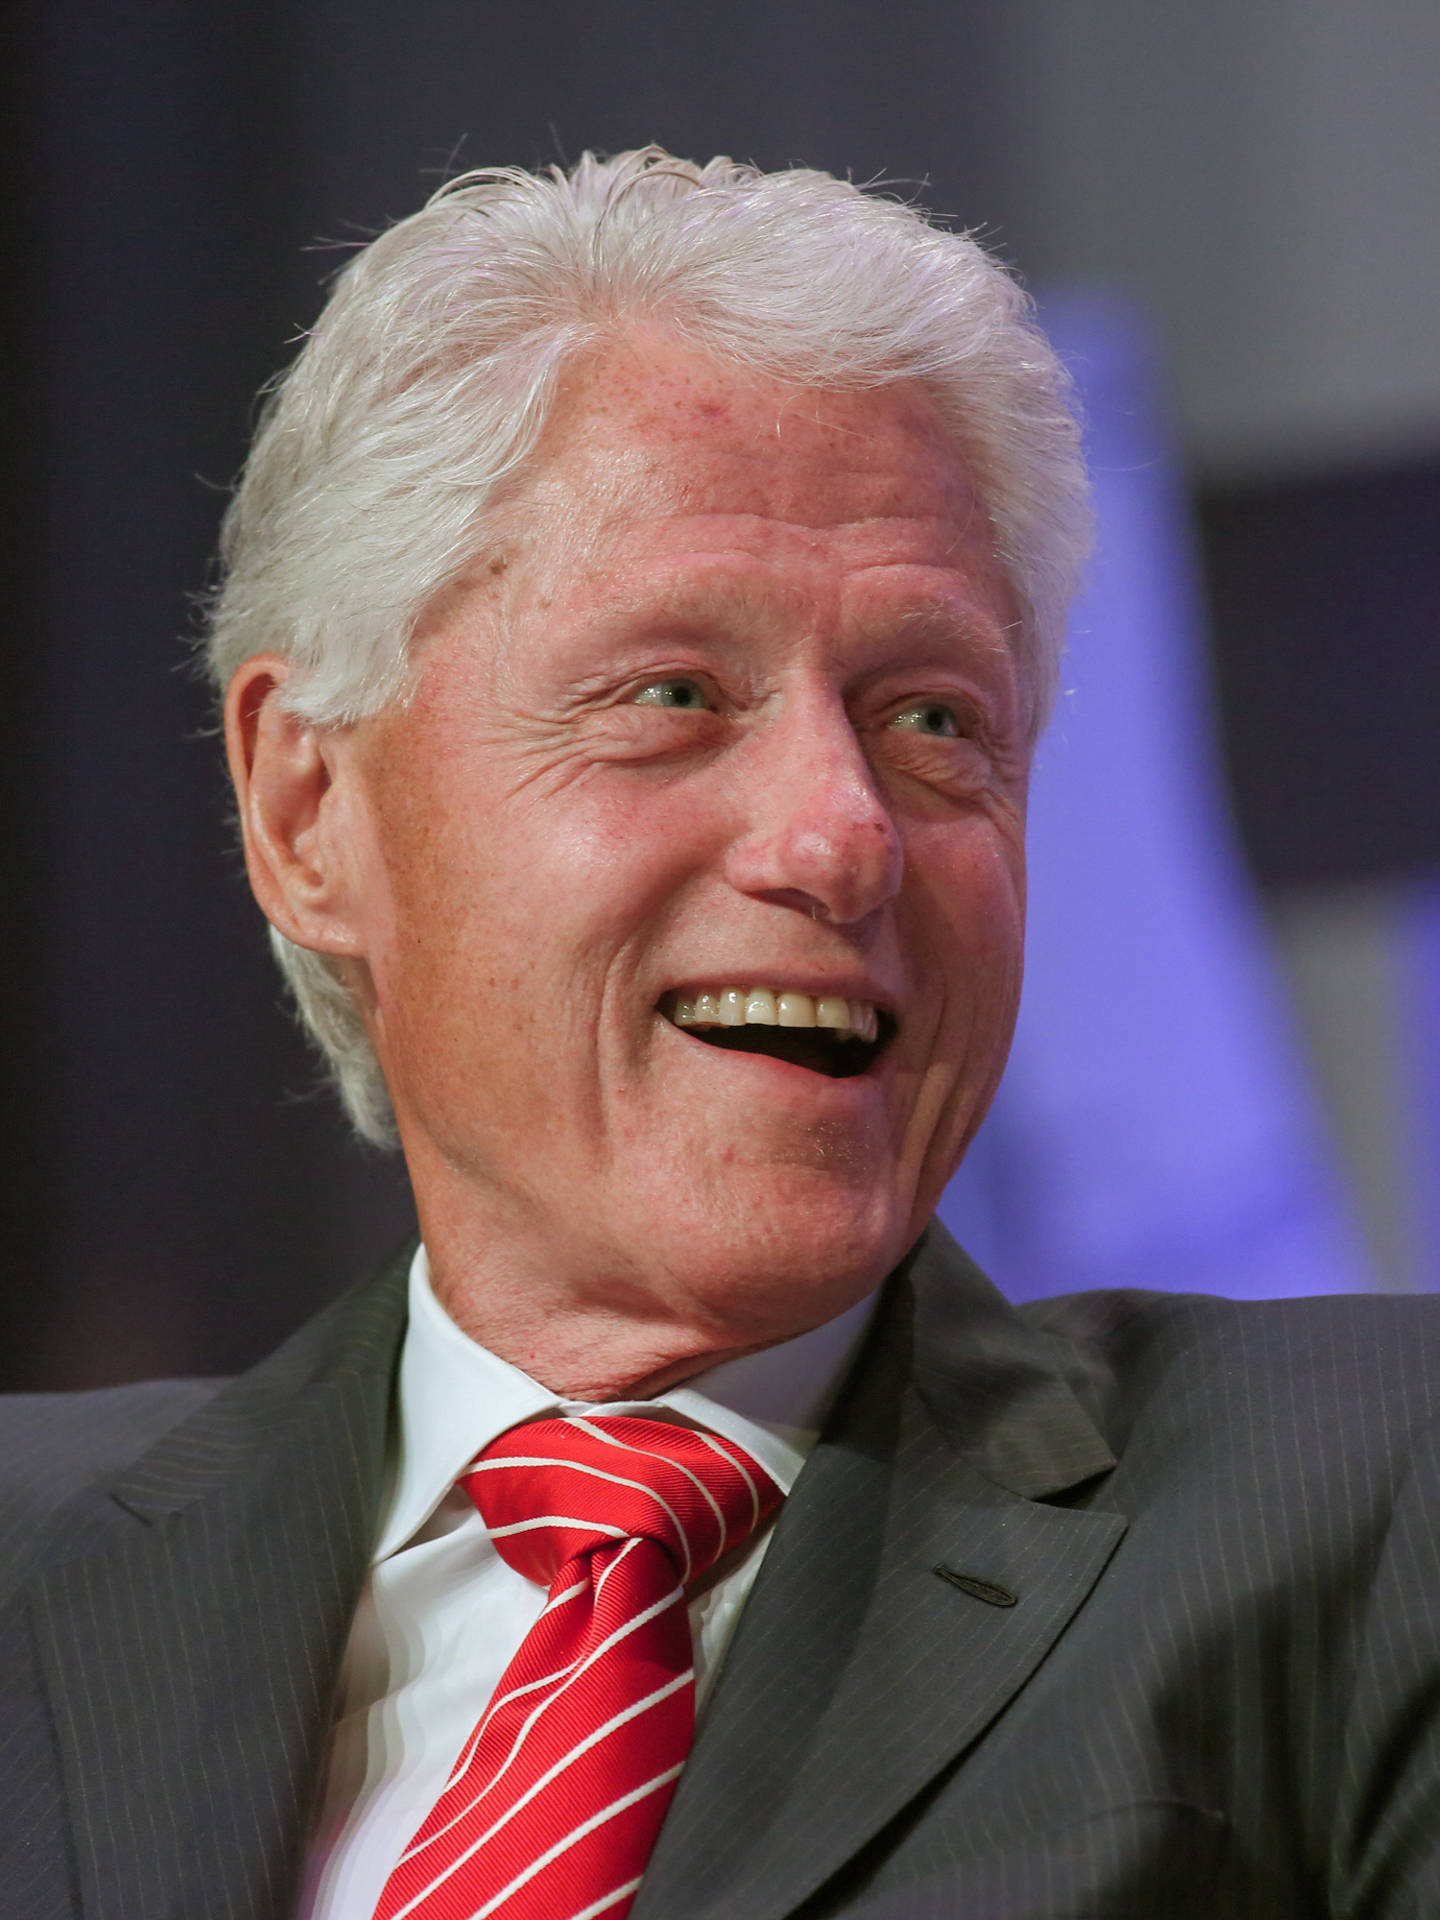 Former President Bill Clinton Spreading Positive Vibes with His Classic Grin. Wallpaper